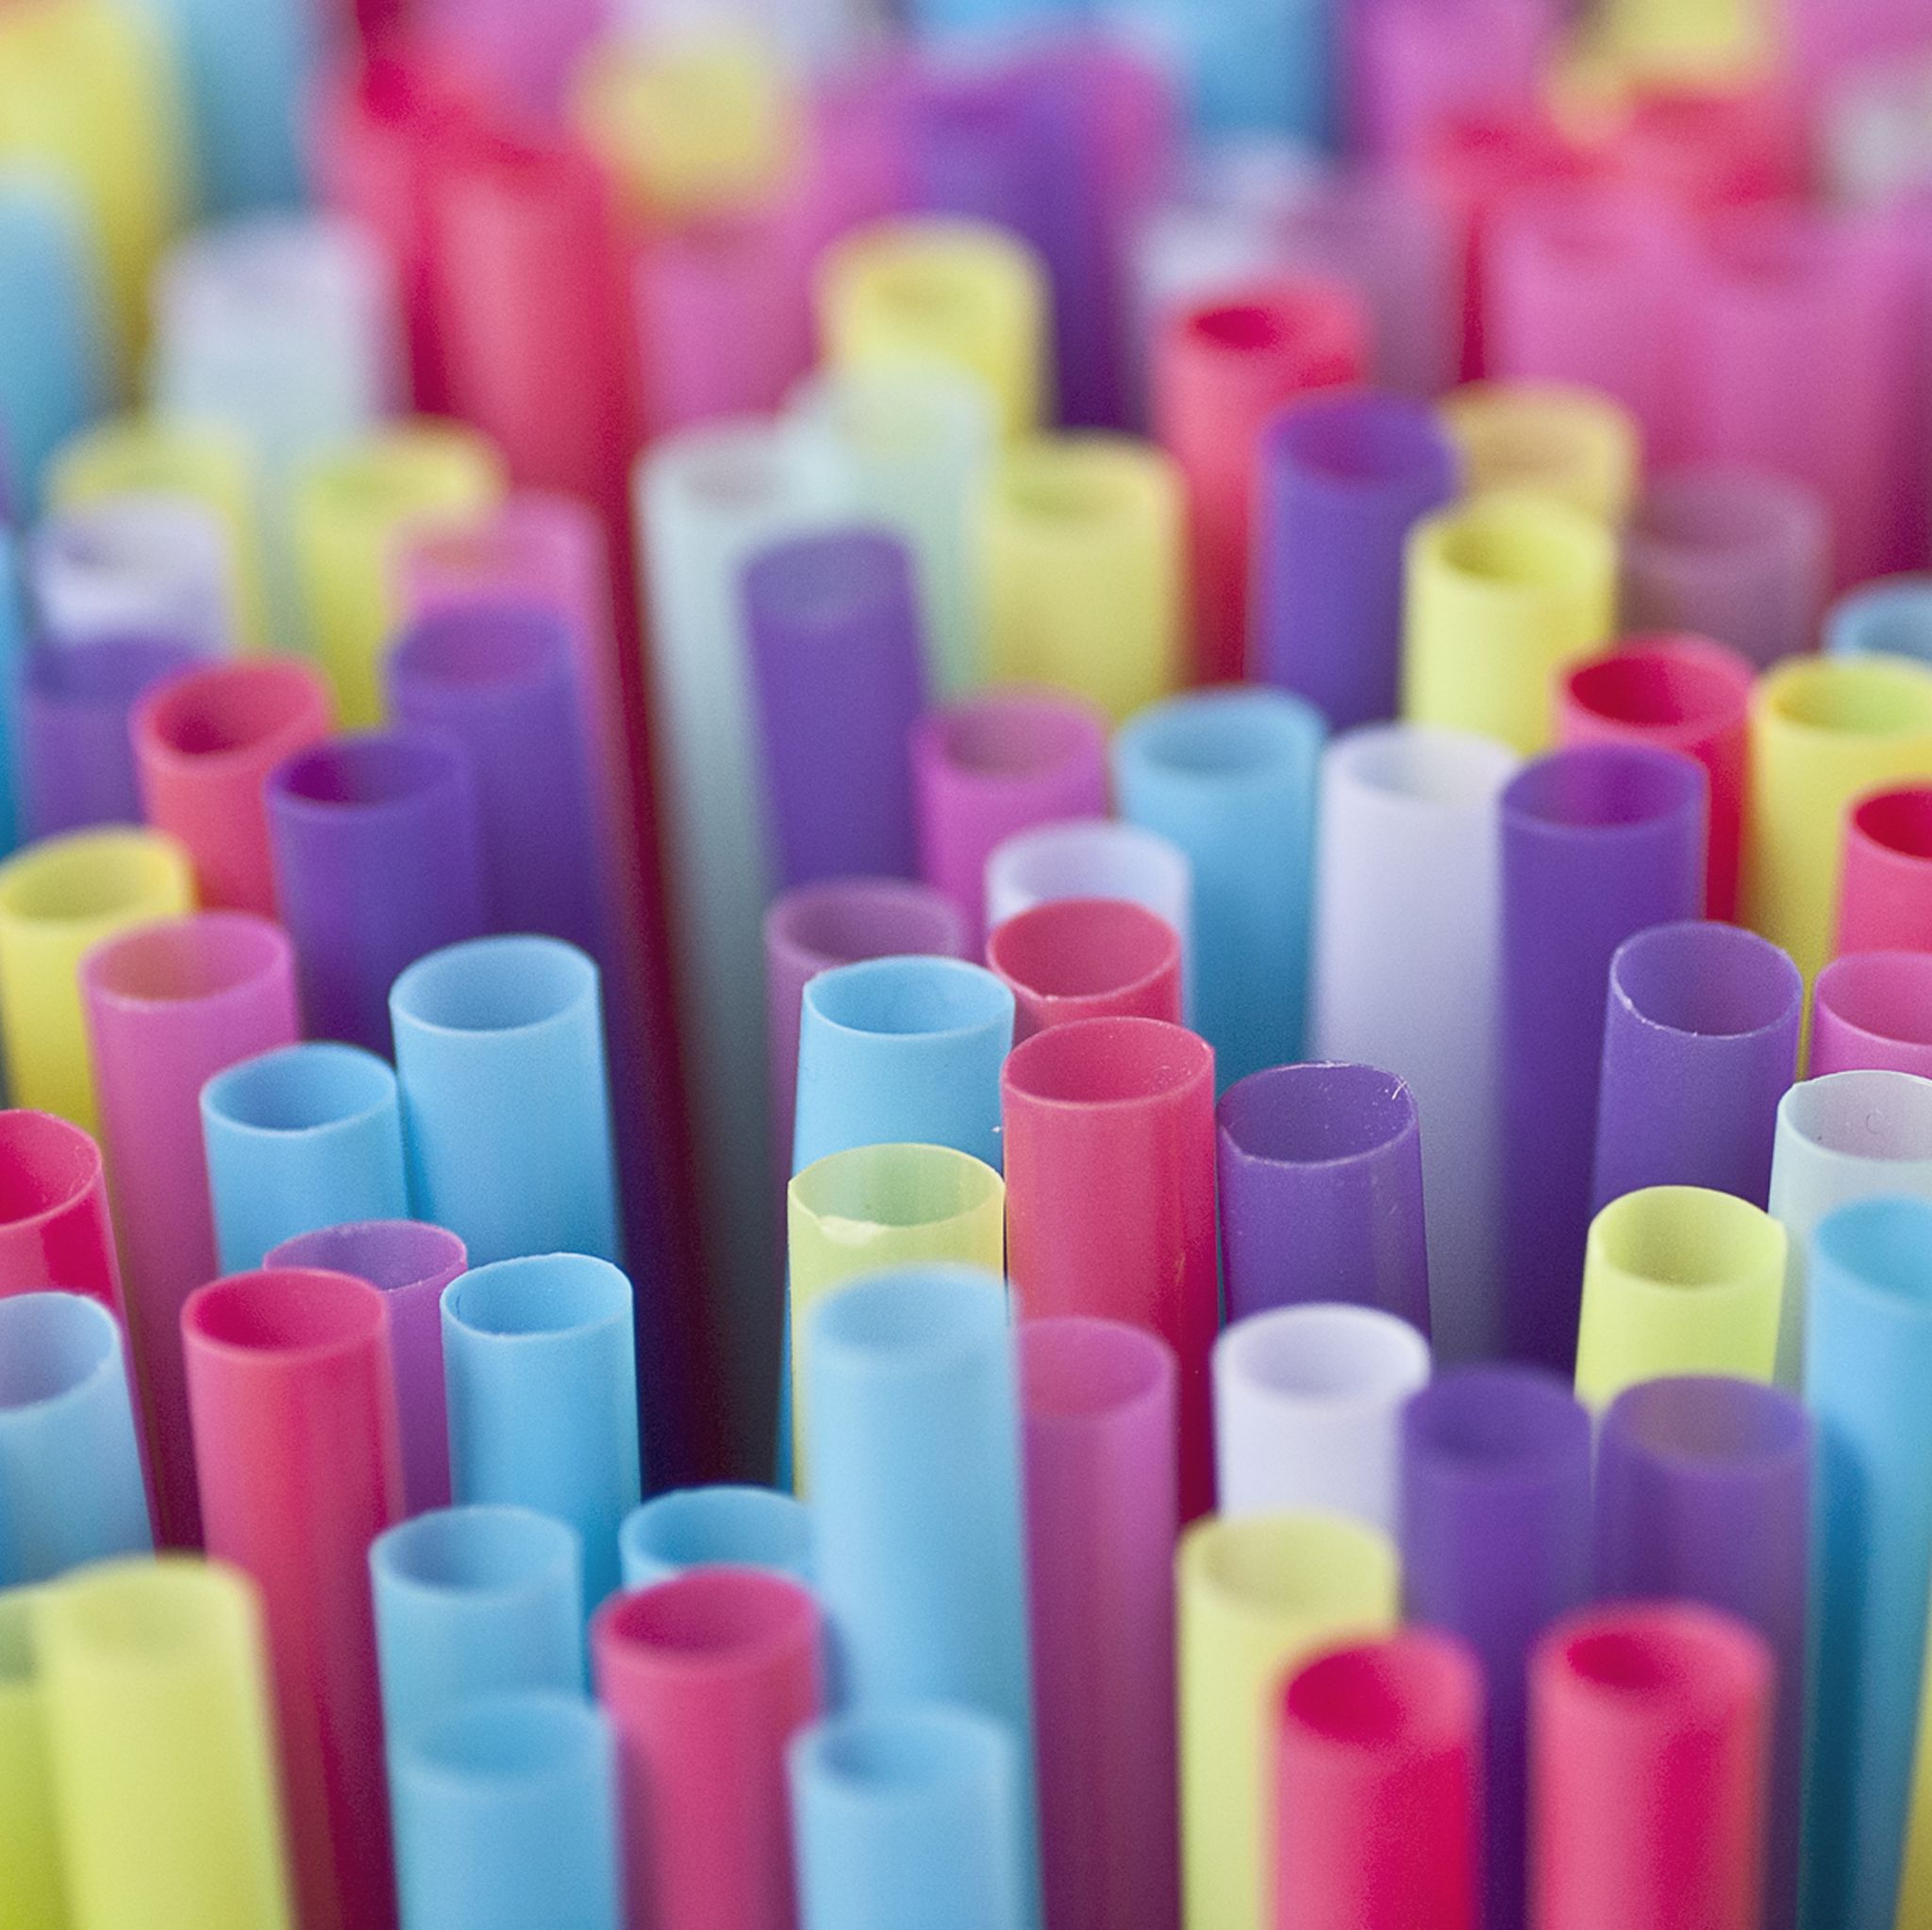 plastic straws, stirrers and cotton buds to be banned in the uk from today